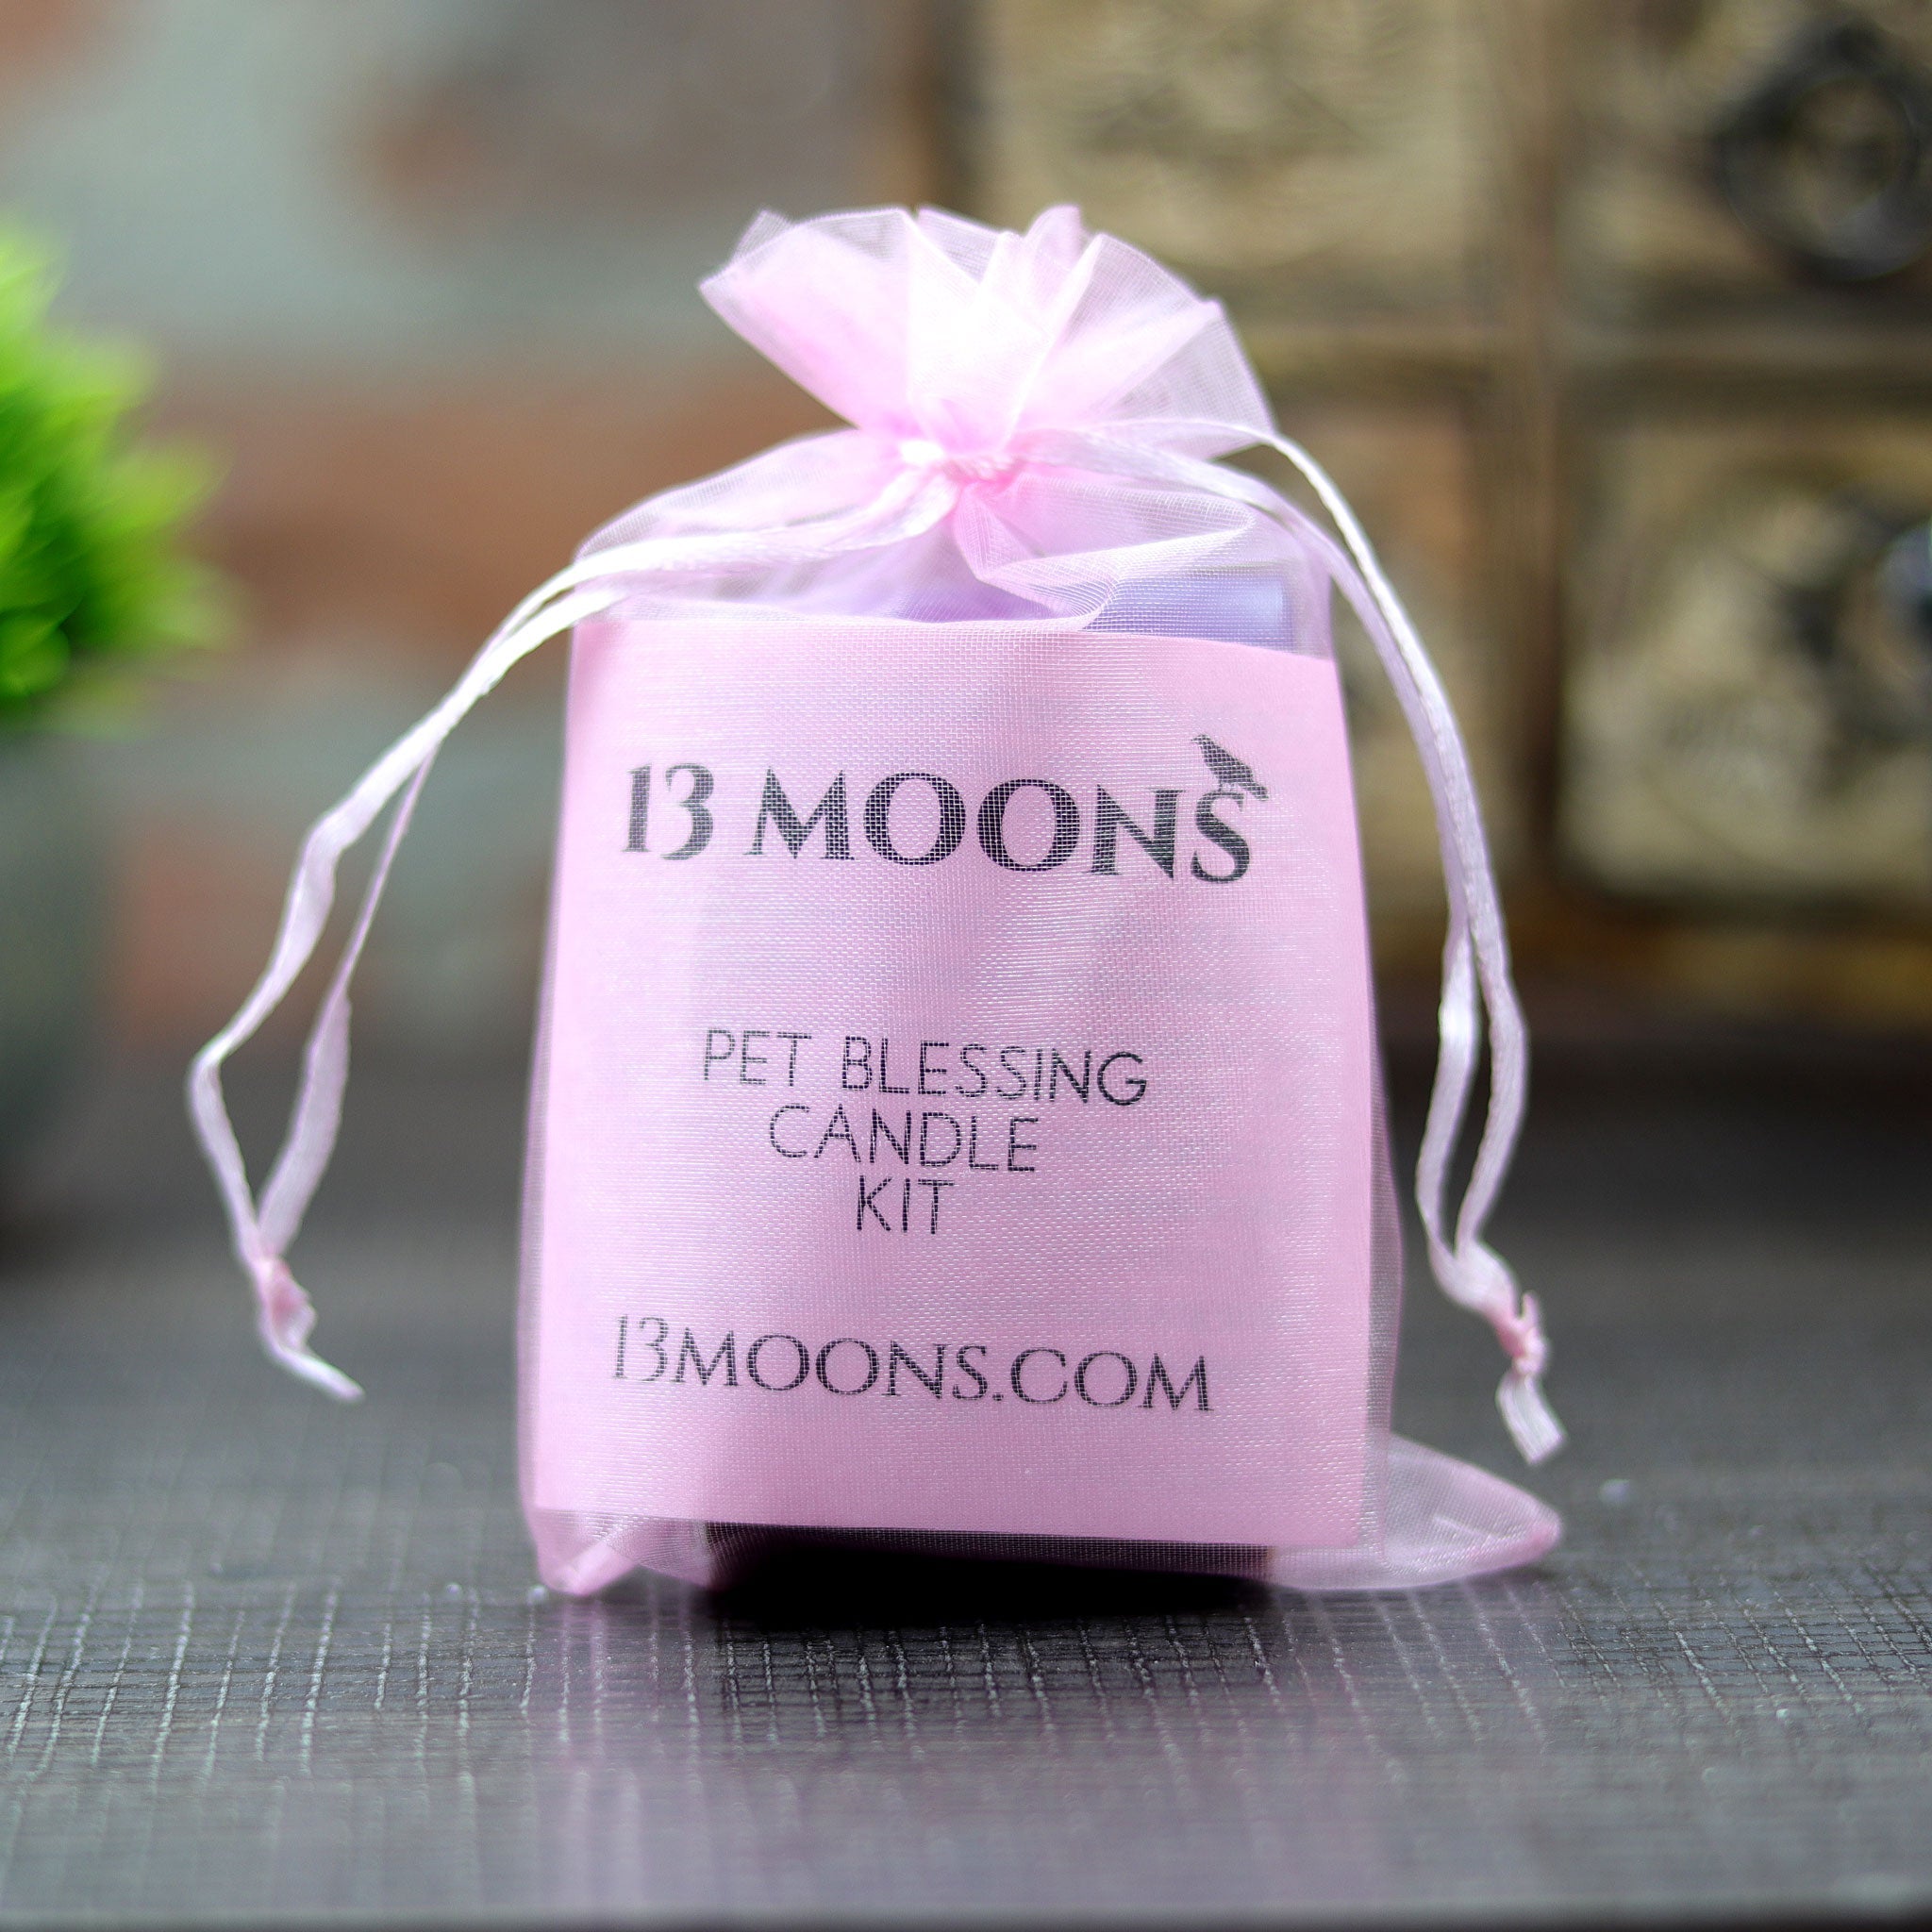 Pet Blessing Candle Kit - 13 Moons